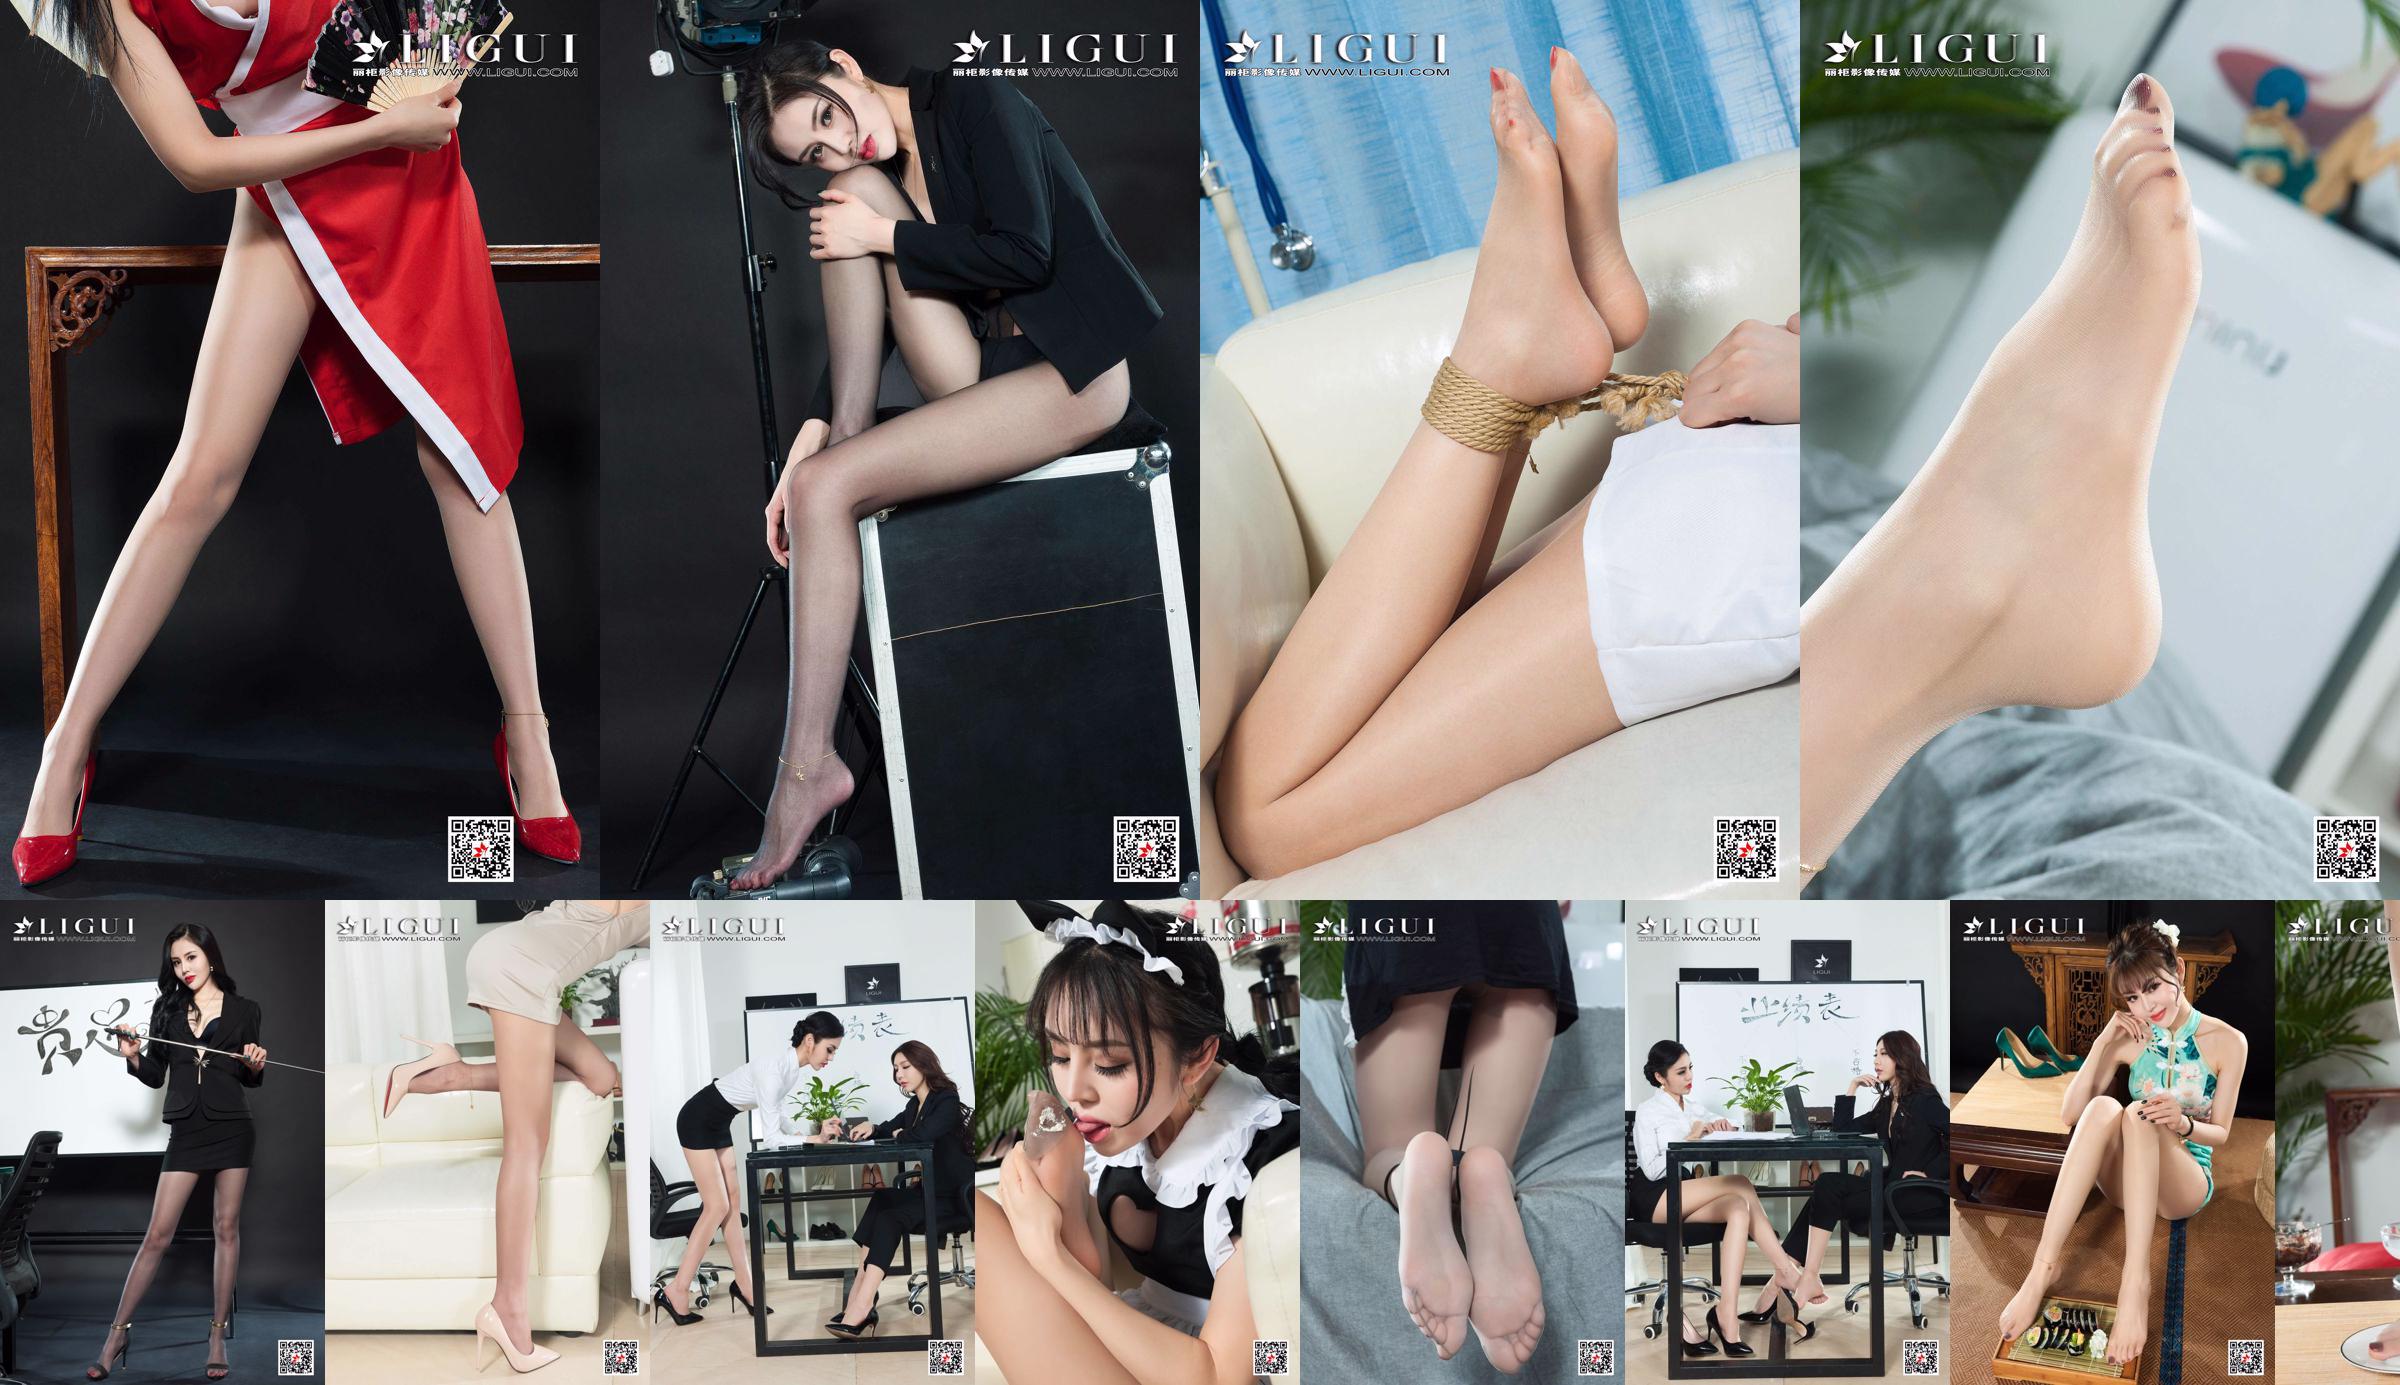 Leg model Lianger "The Art of Binding Rope in Stockings and Legs" [Ligui Meishu Ligui] No.82d2cb Page 34